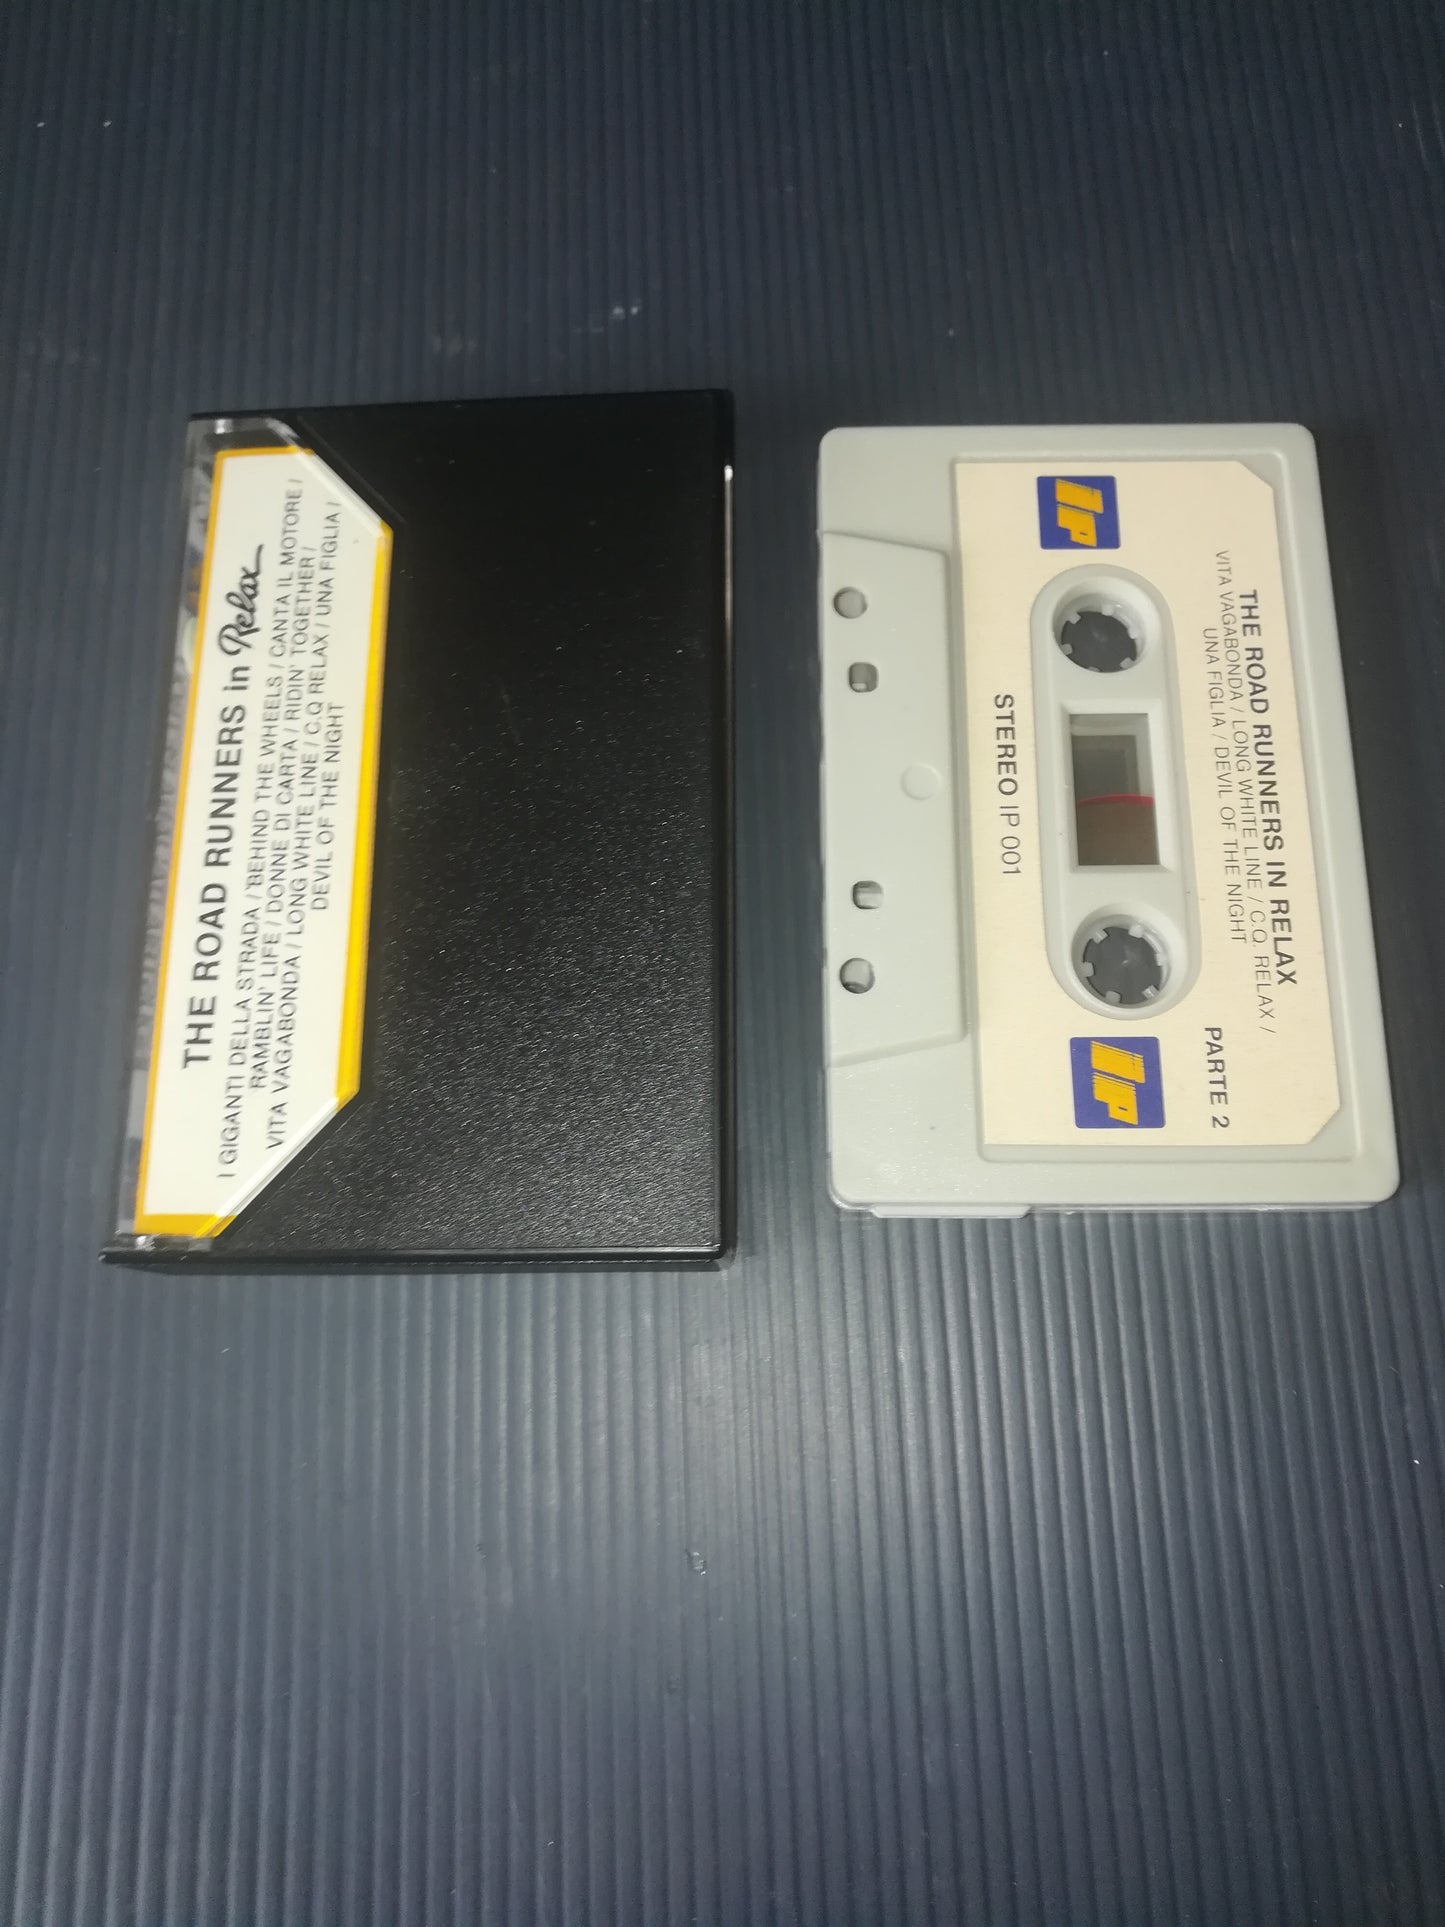 The Road Runners In Relax" The Road Runners Music Cassette